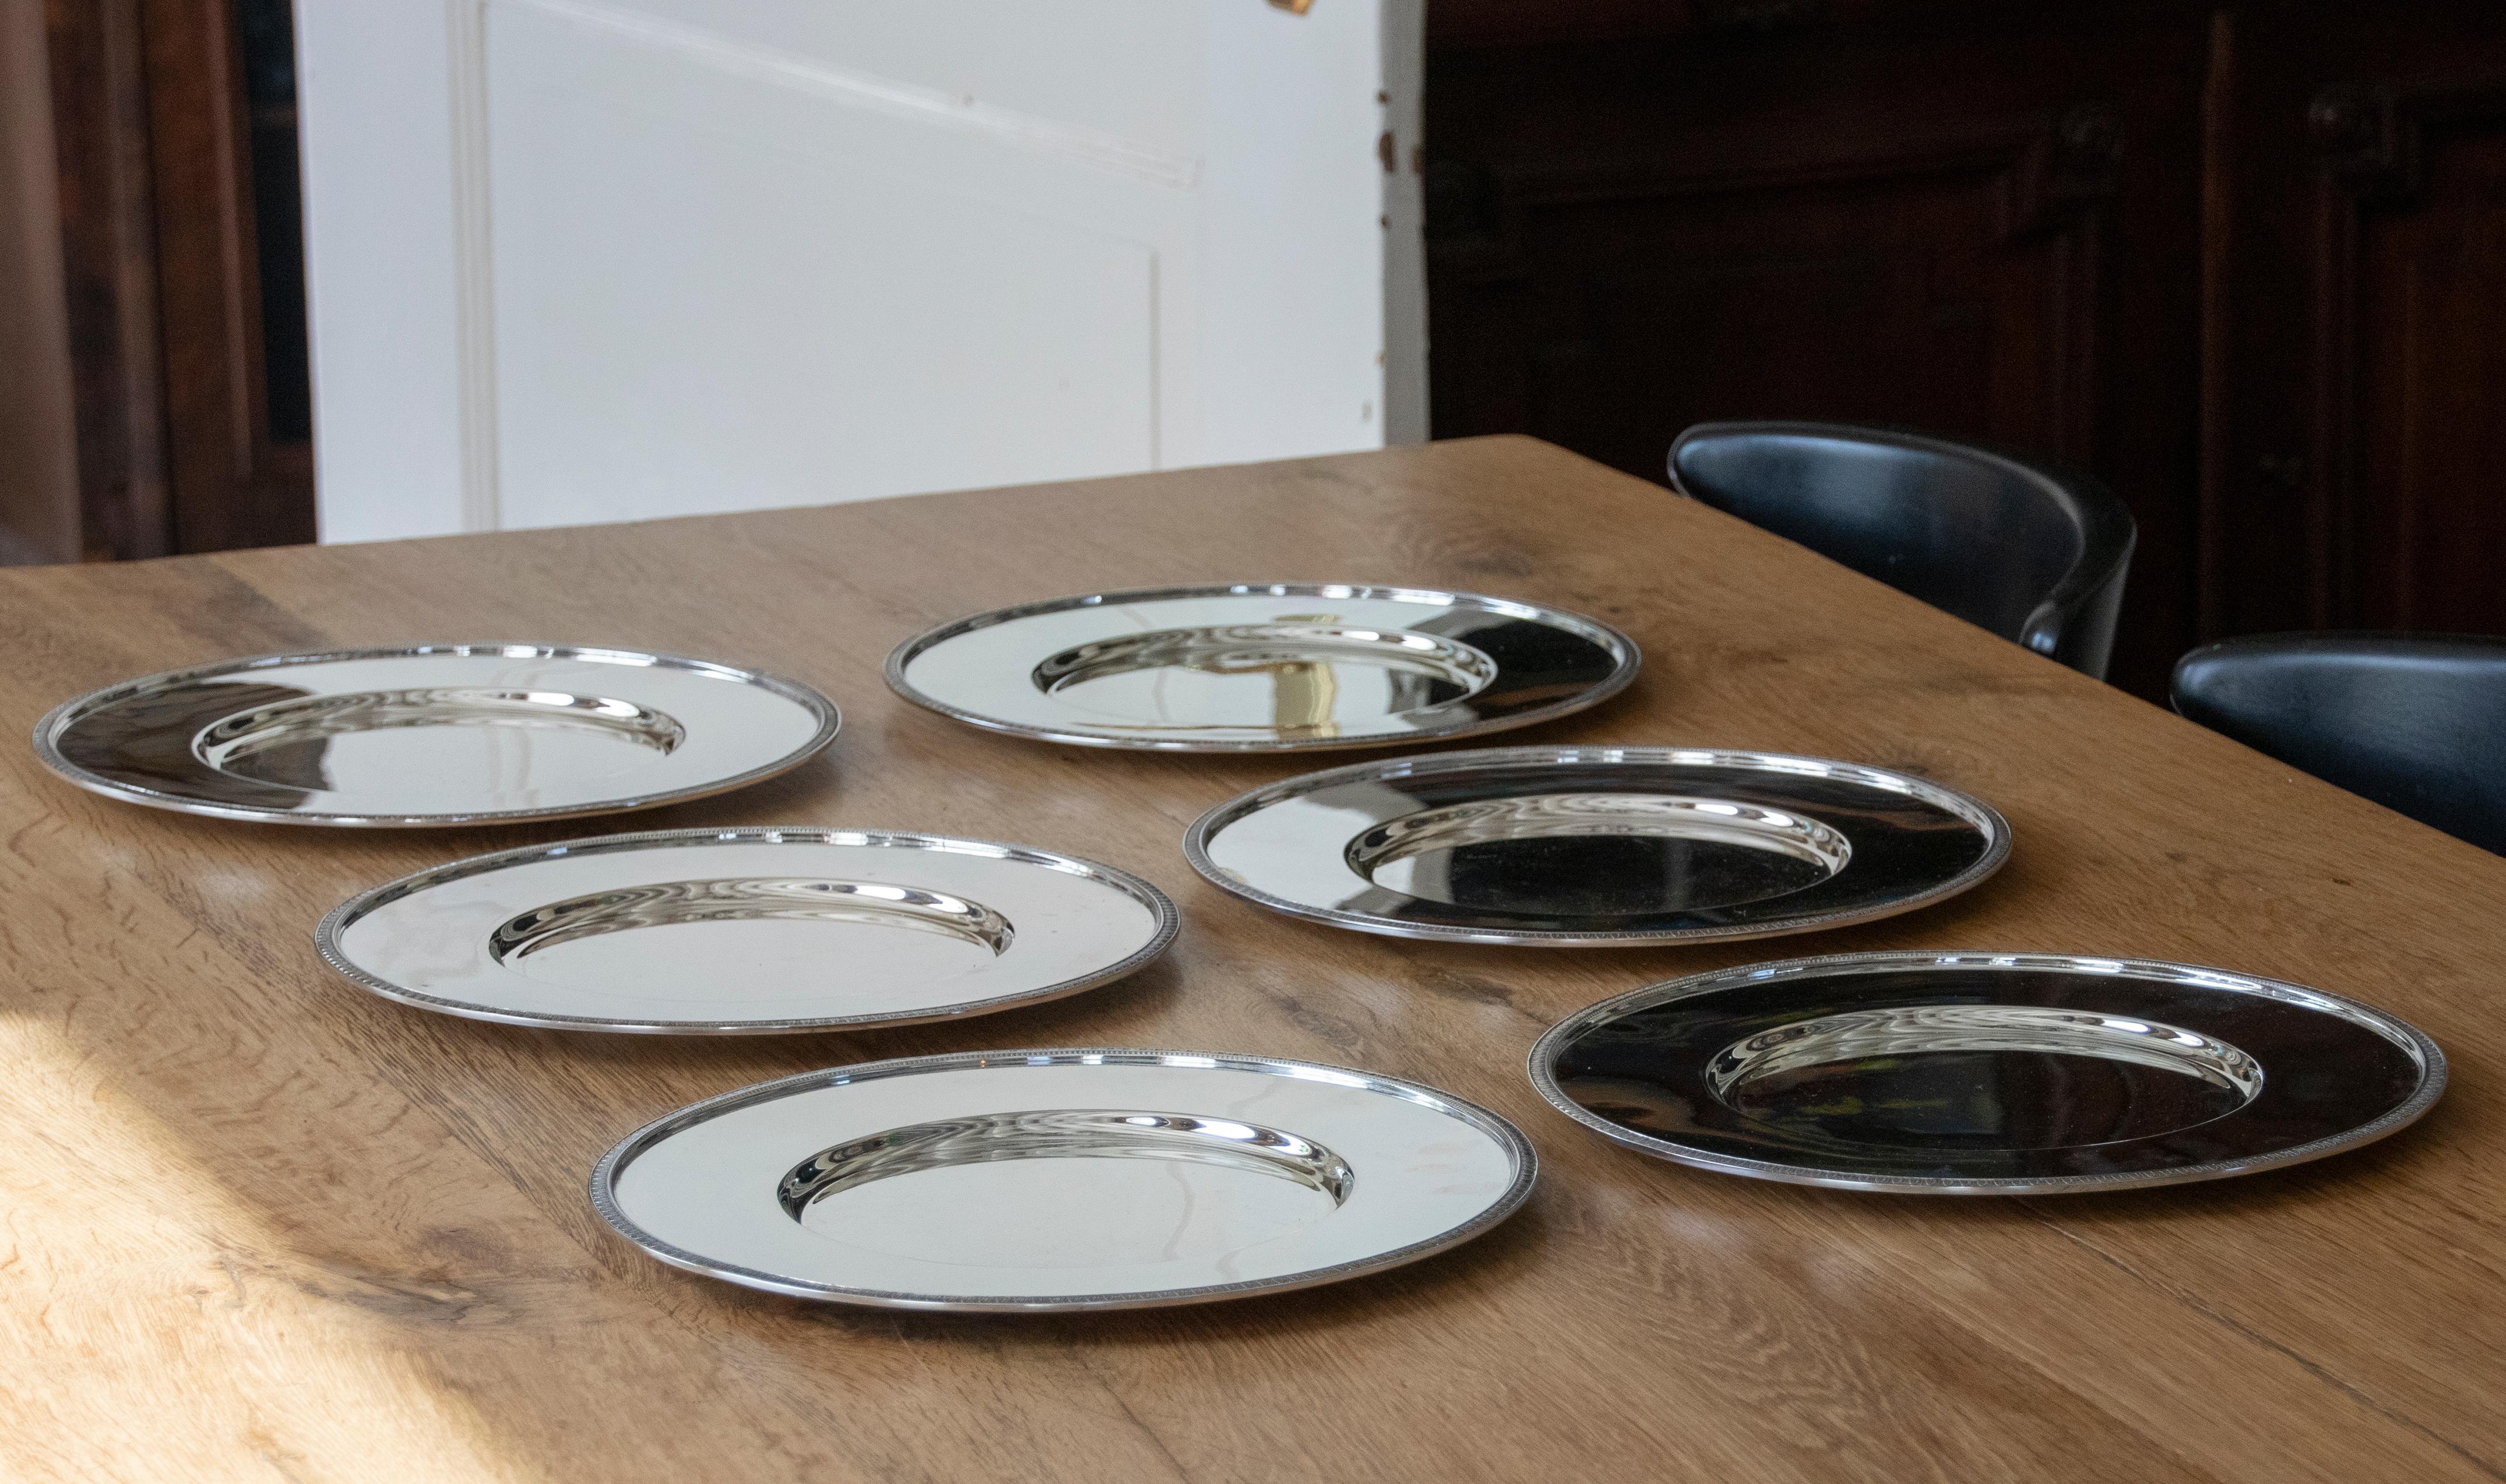 Set of 6 Silver Plated Plates Made by Christofle Model Malmaison 2